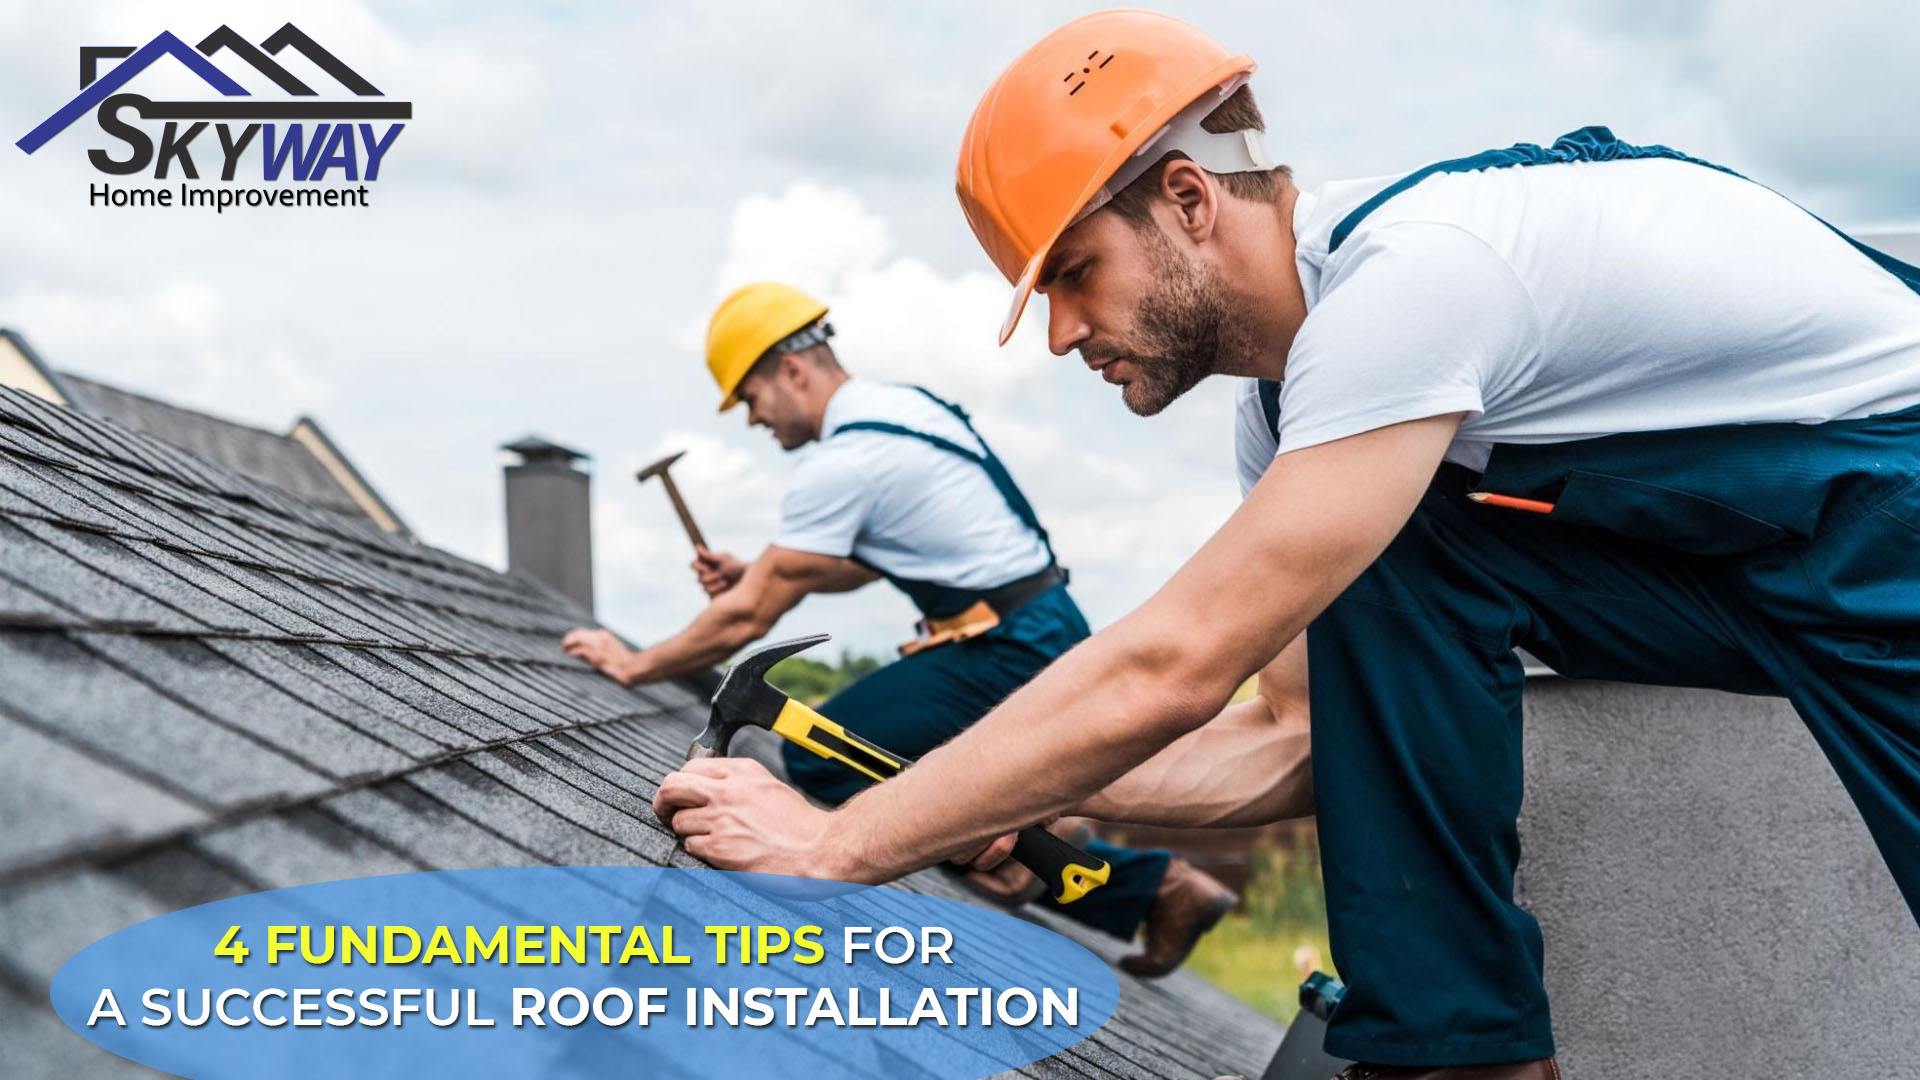 4 Fundamental Tips for a Successful Roof Installation